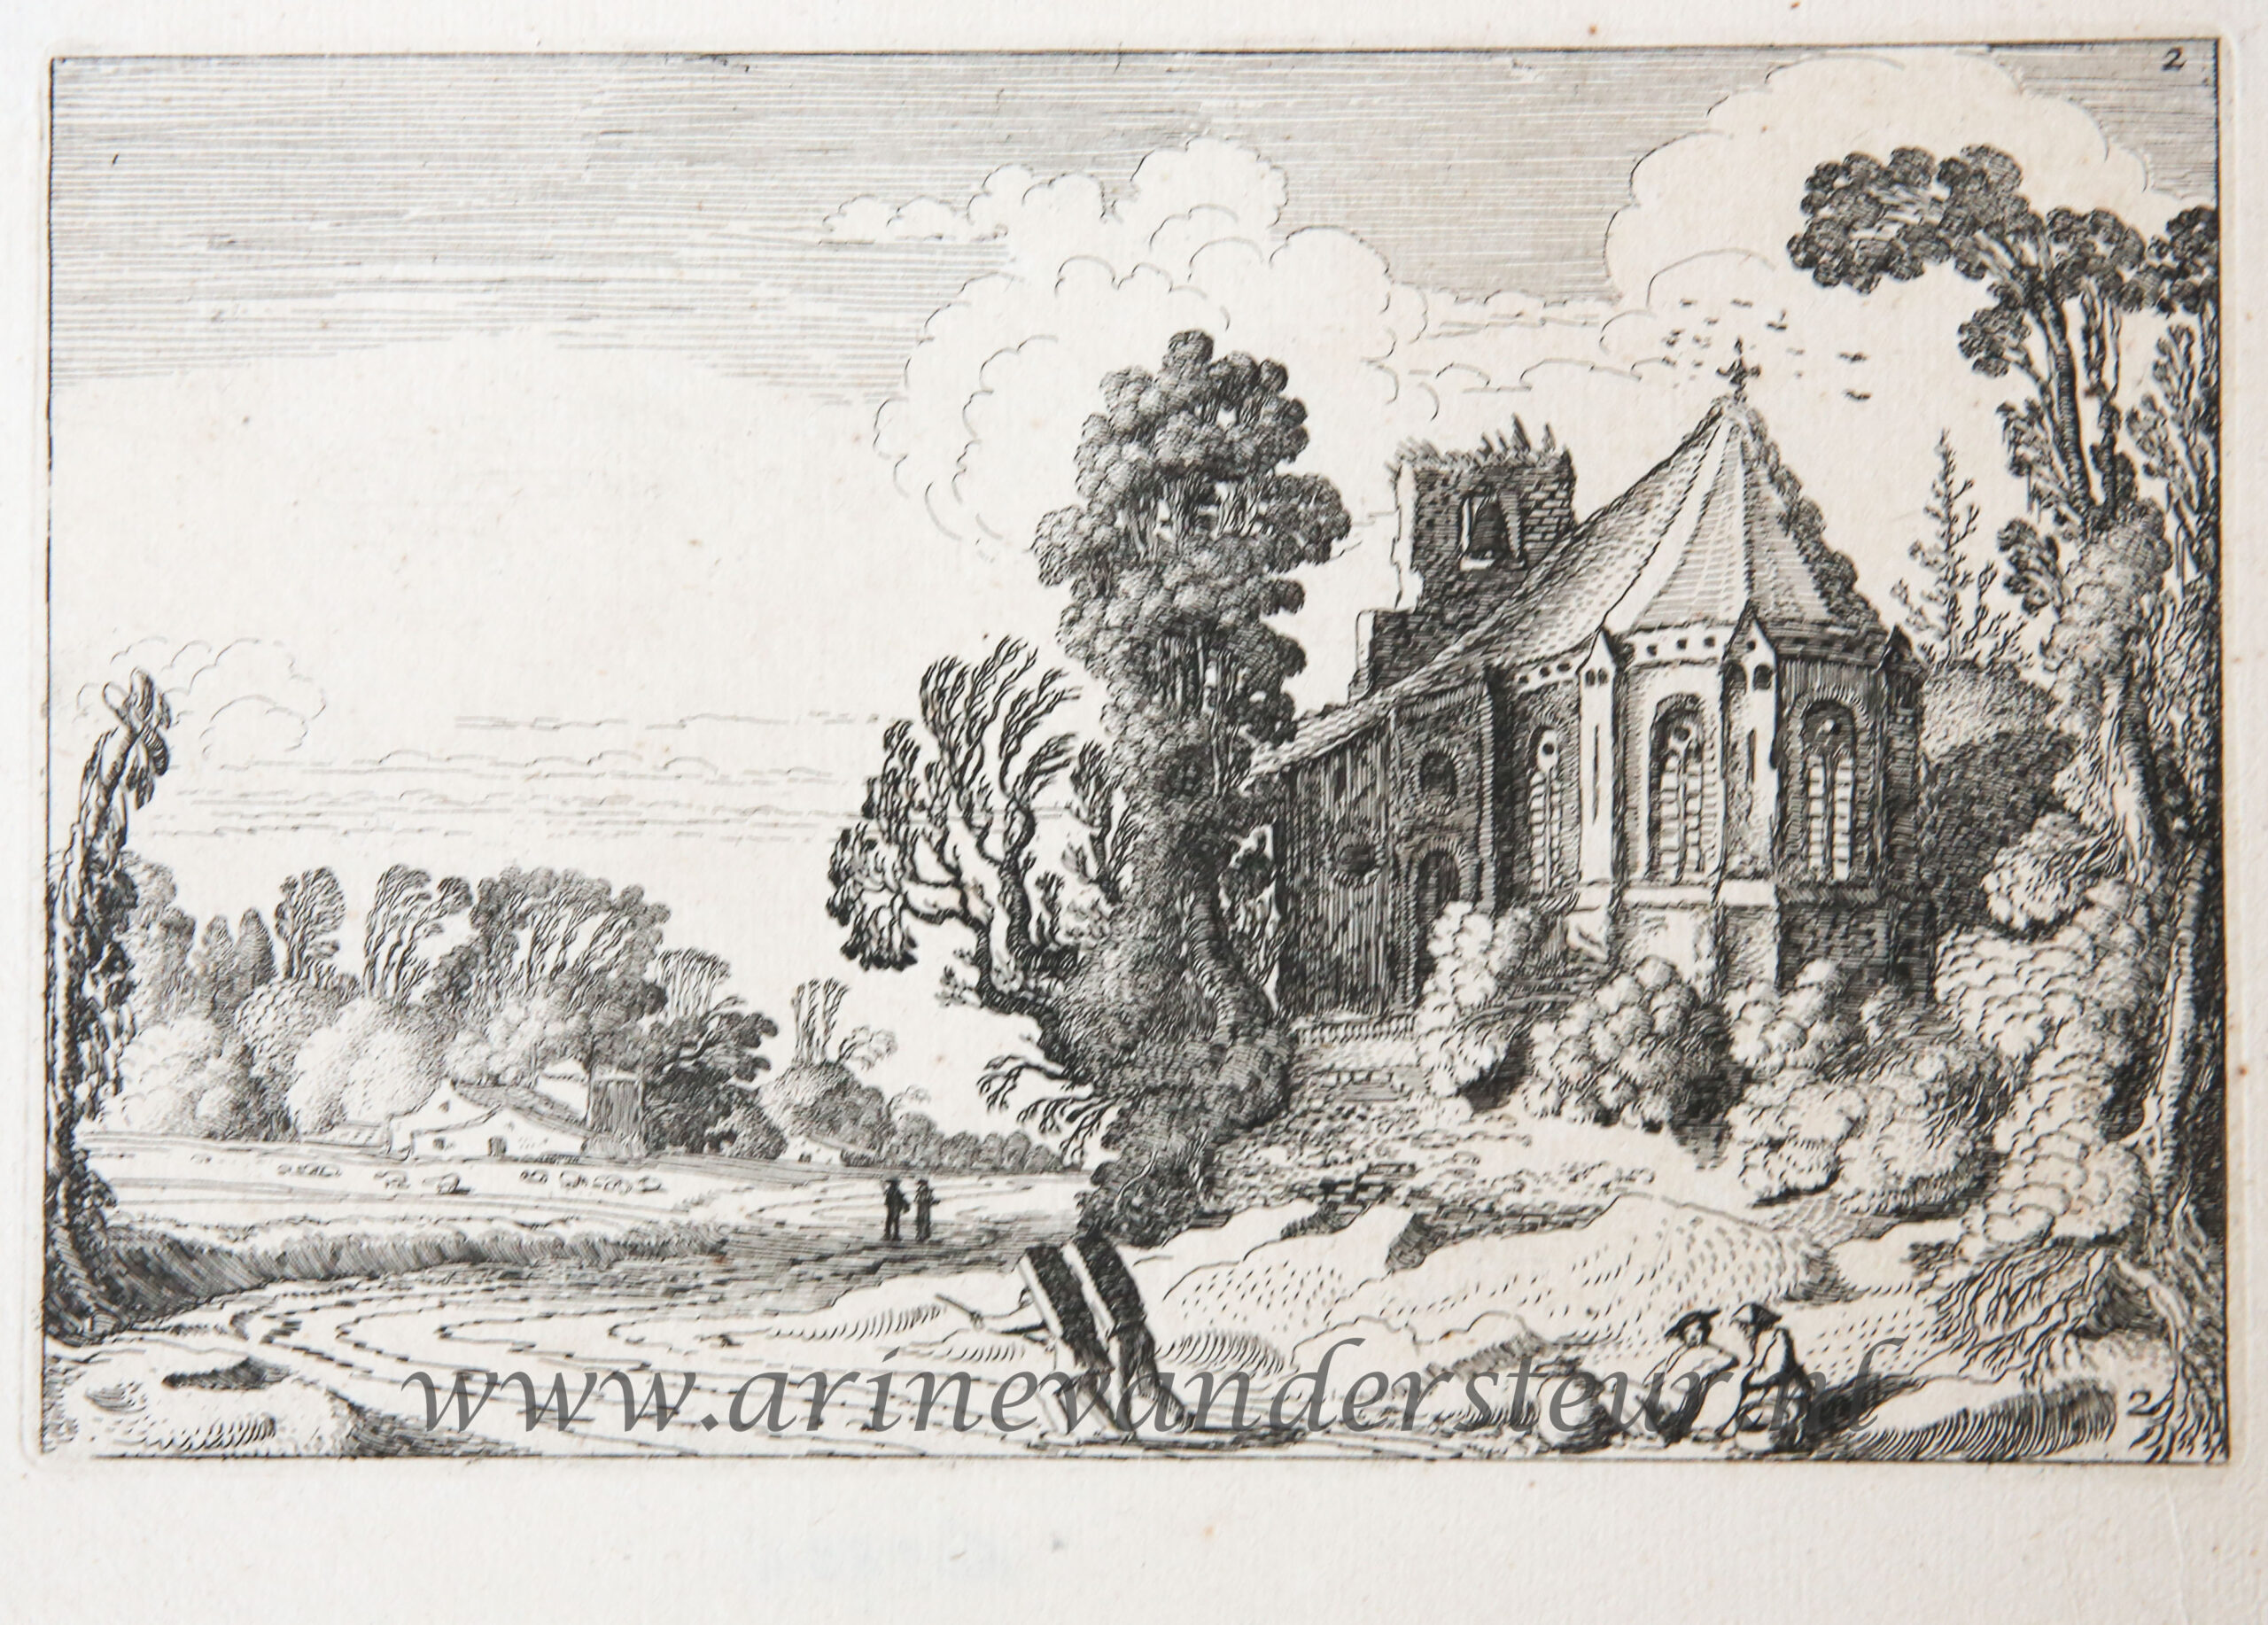 [Antique etching, ets, landscape print] J. v.d. Velde II, Figures on a country road near a ruined church, published before 1713.